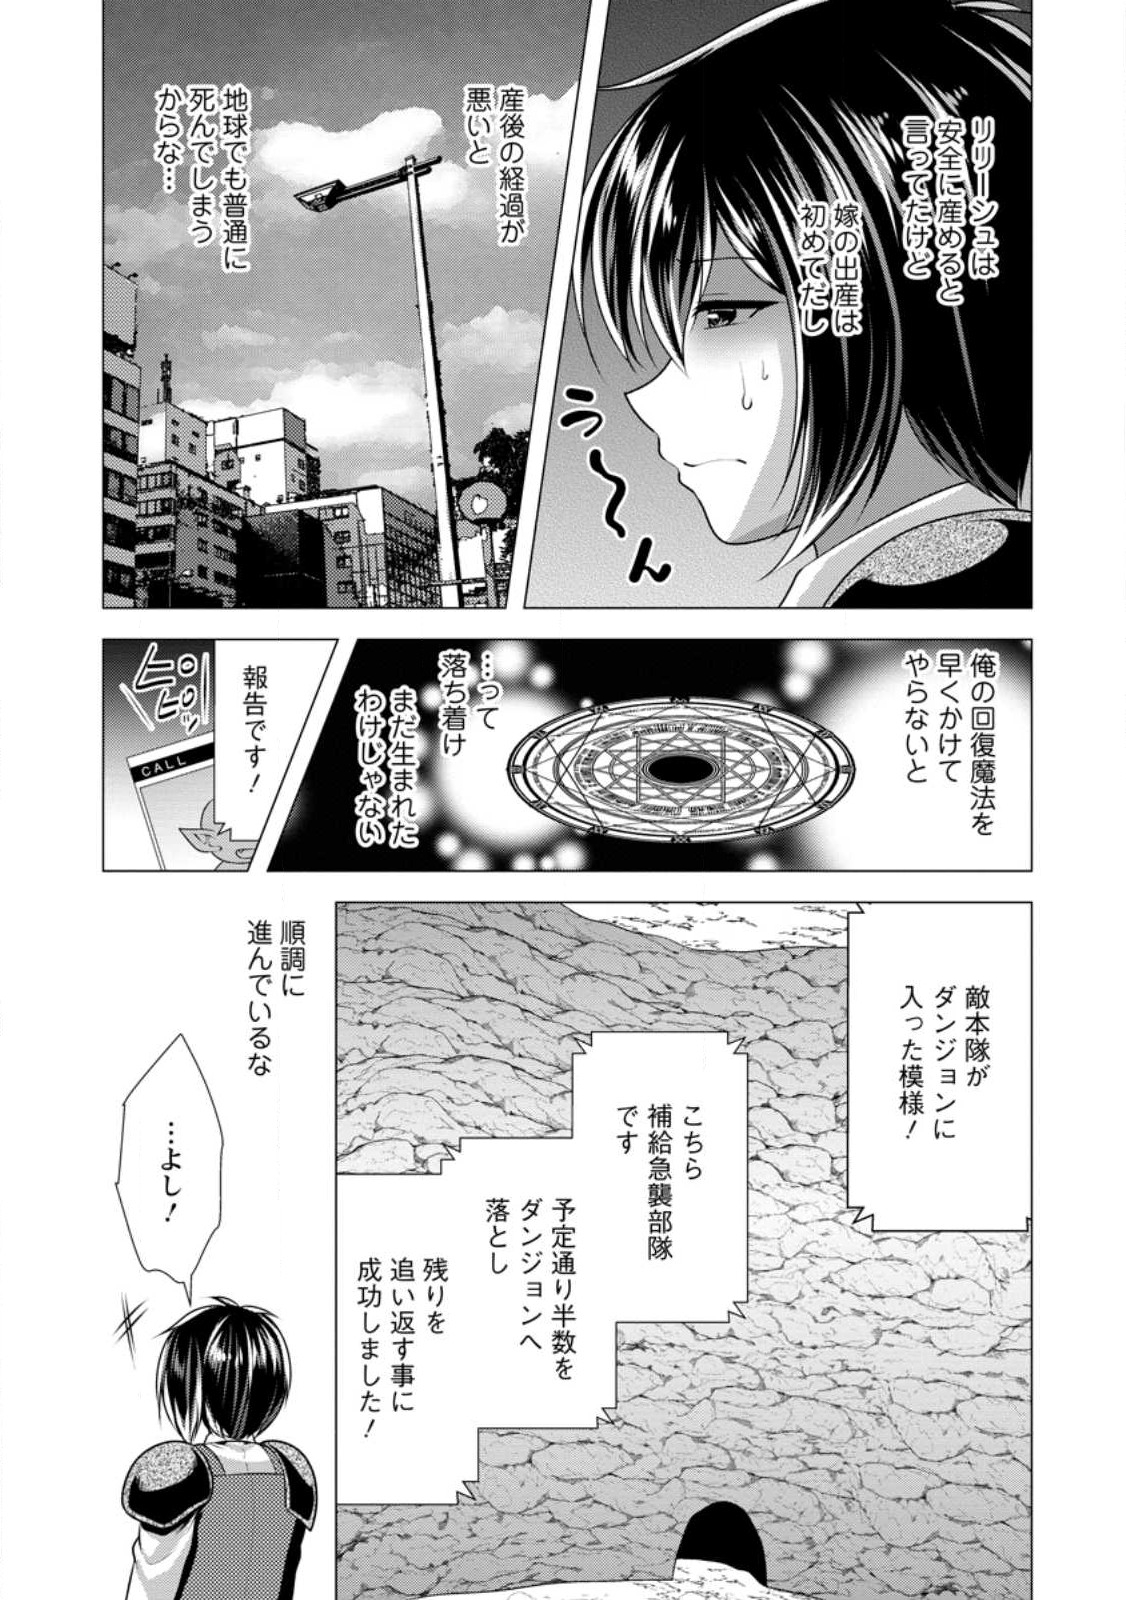 Hisshou Dungeon Unei Houhou - Chapter 57.3 - Page 3